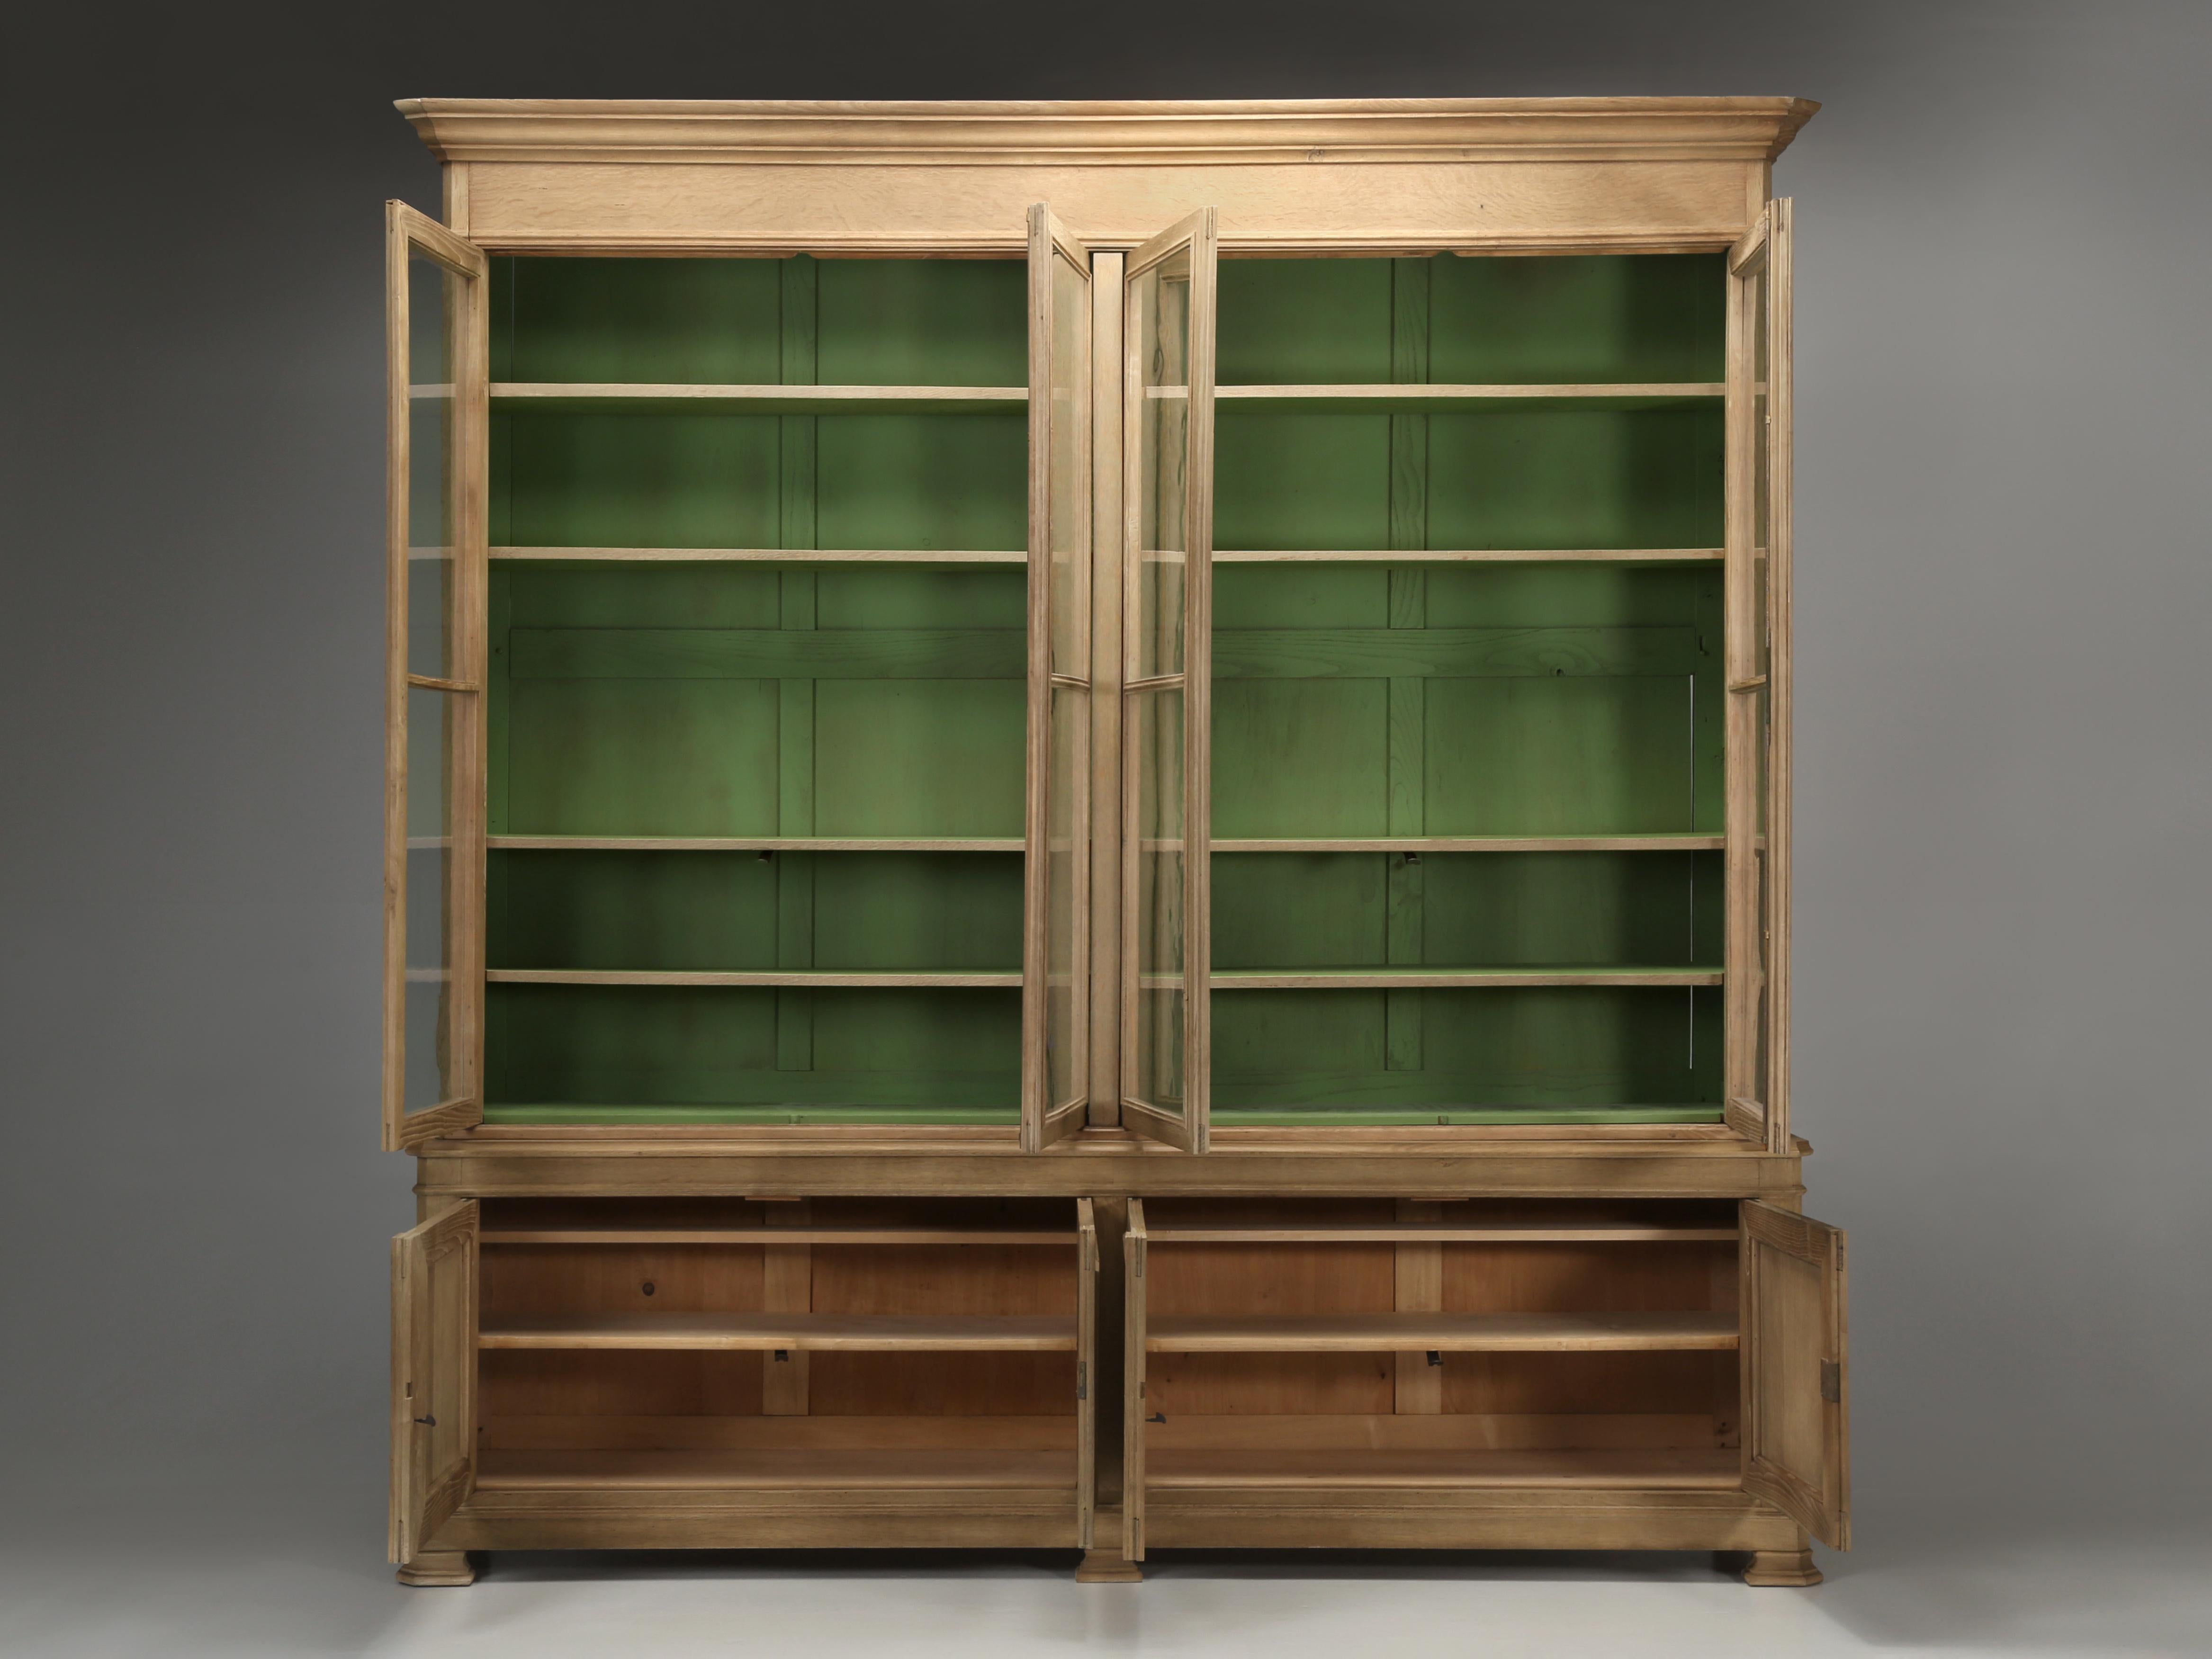 French Bookcase or Bibliothèque Louis Philippe Washed Oak Original Glass, c1800s For Sale 5